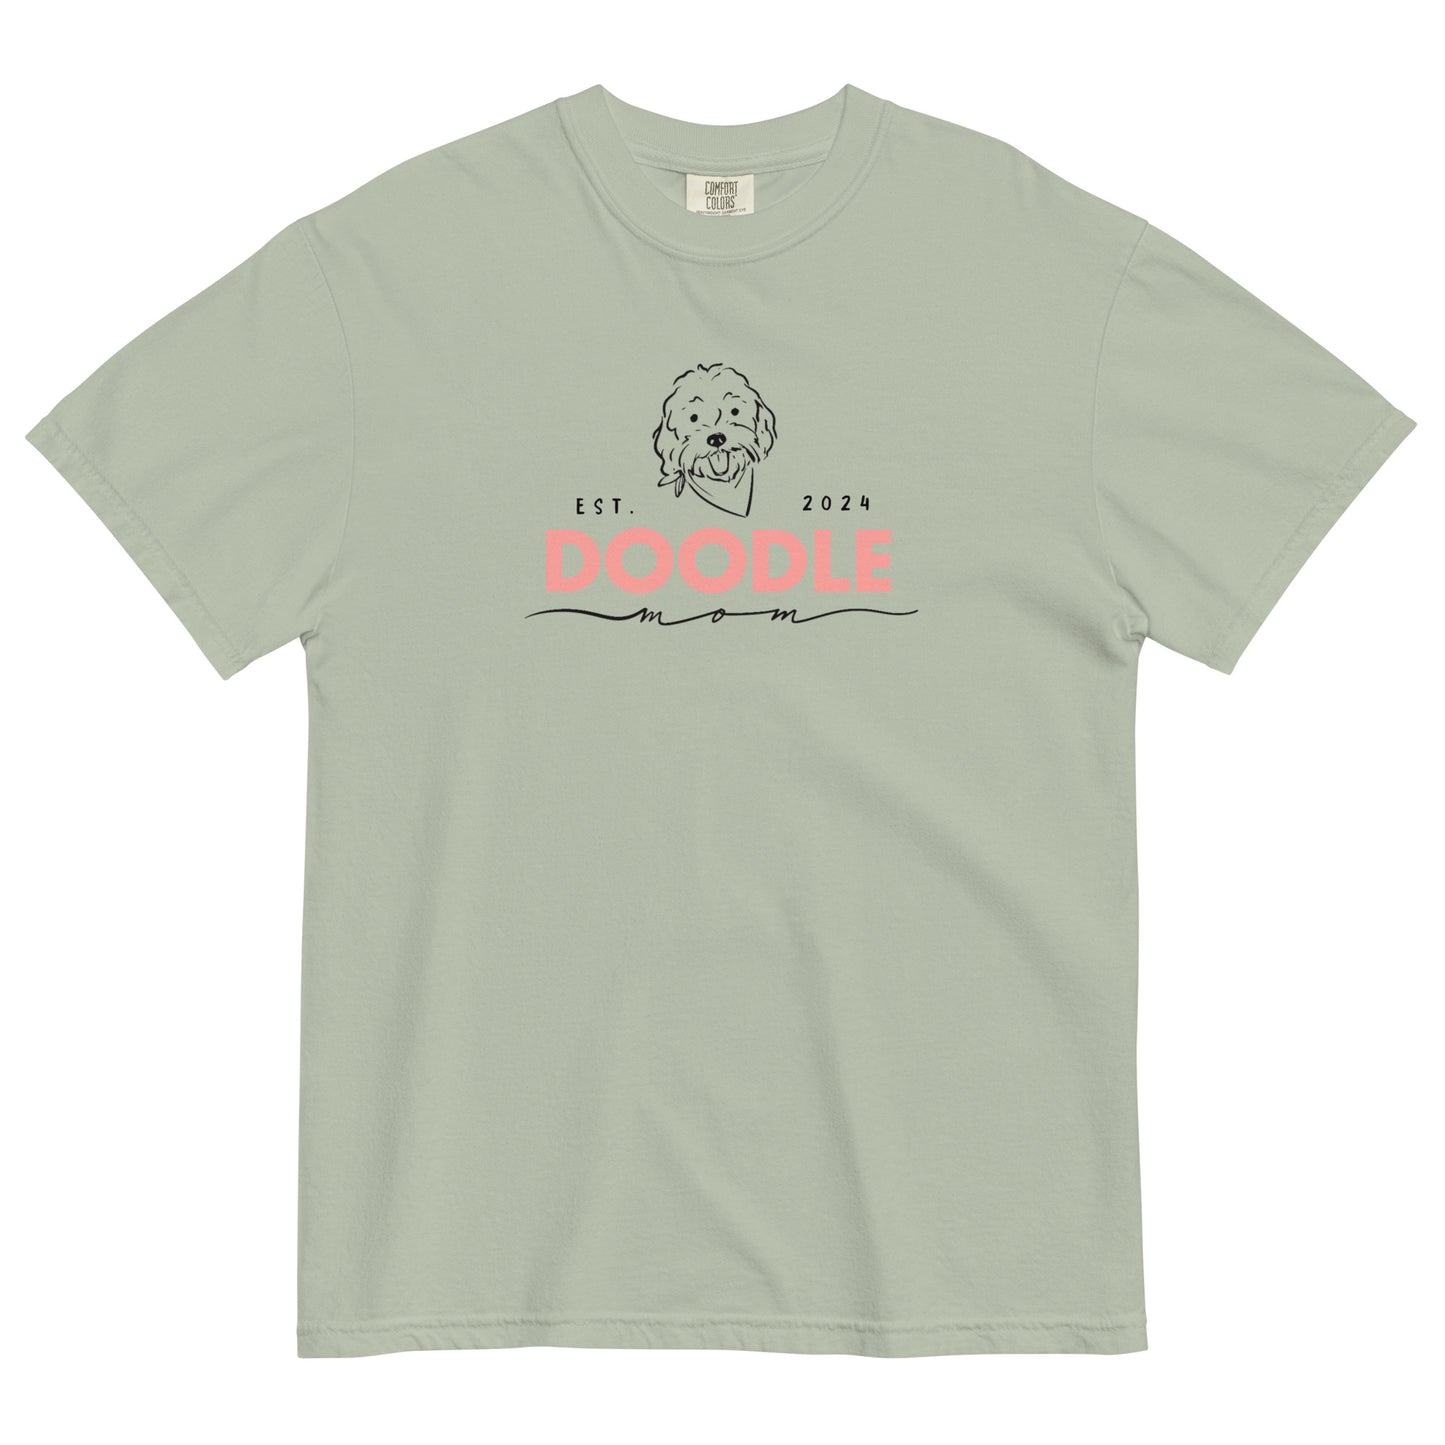 This Goldendoodle mom shirt features the message, "Doodle Mom Est. 2024" and a cute Doodle dog's face printed on the front. The tag inside the T-shirt says Comfort Colors